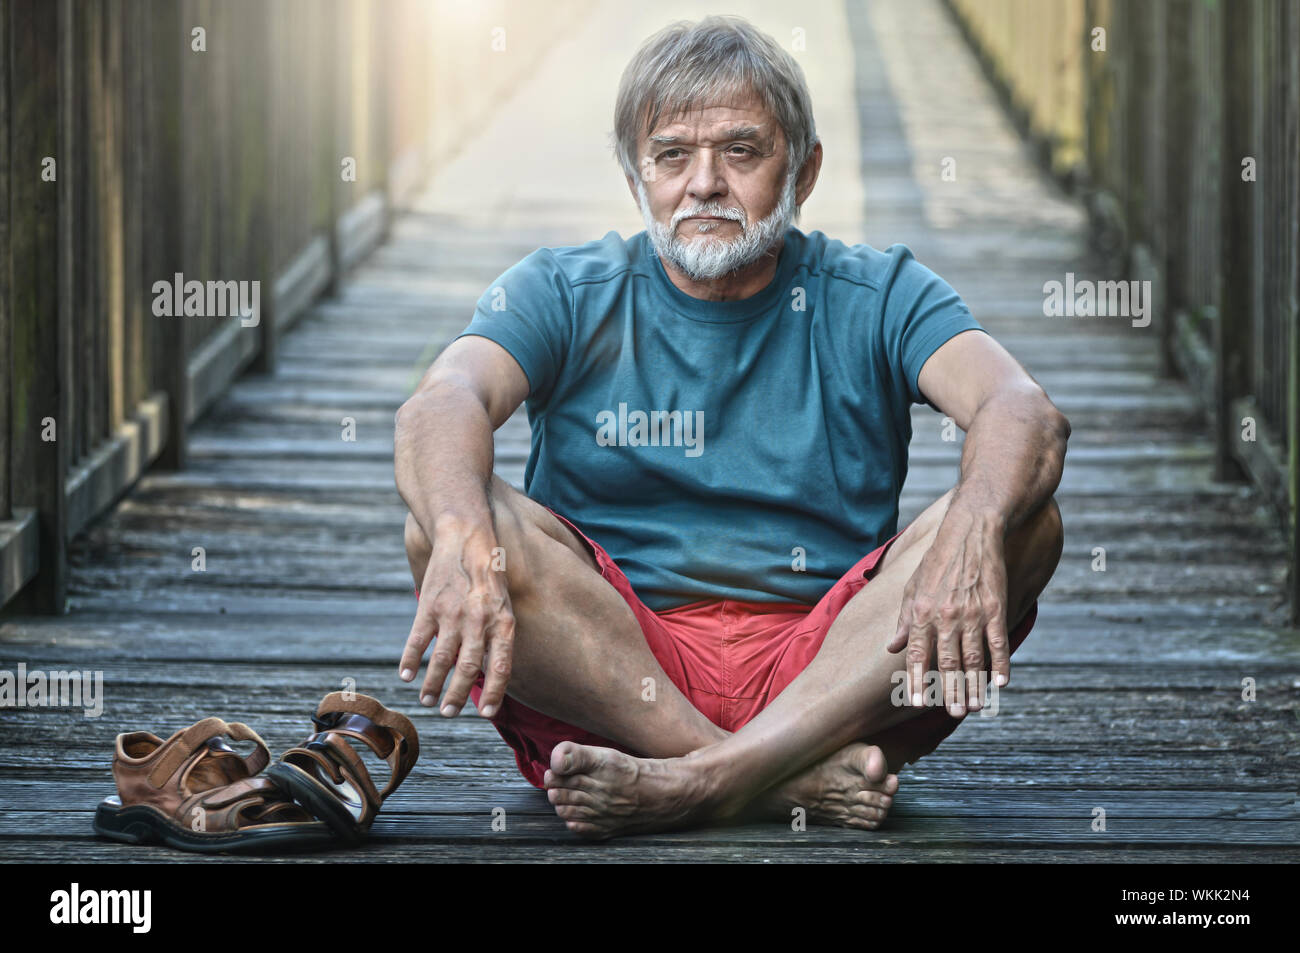 Old man balanced and satisfied Stock Photo